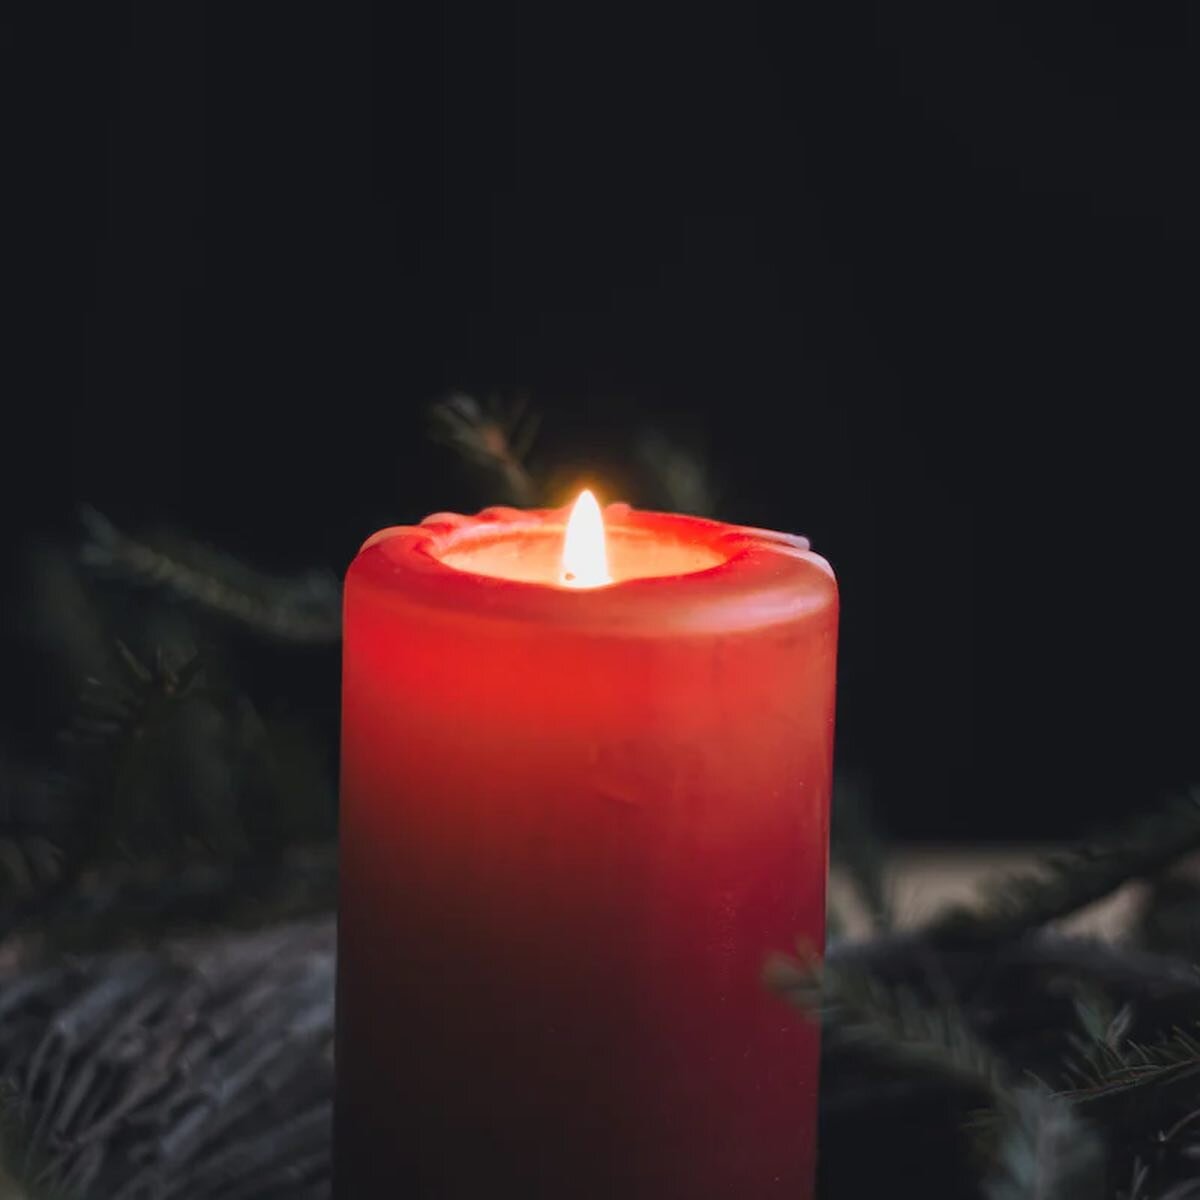 This time of year can be challenging for those who have lost loved ones. With a strong focus on gathering of family and friends, we are reminded of those who are no longer with us, and anything that may have been left unsaid. 

If you are feeling thi